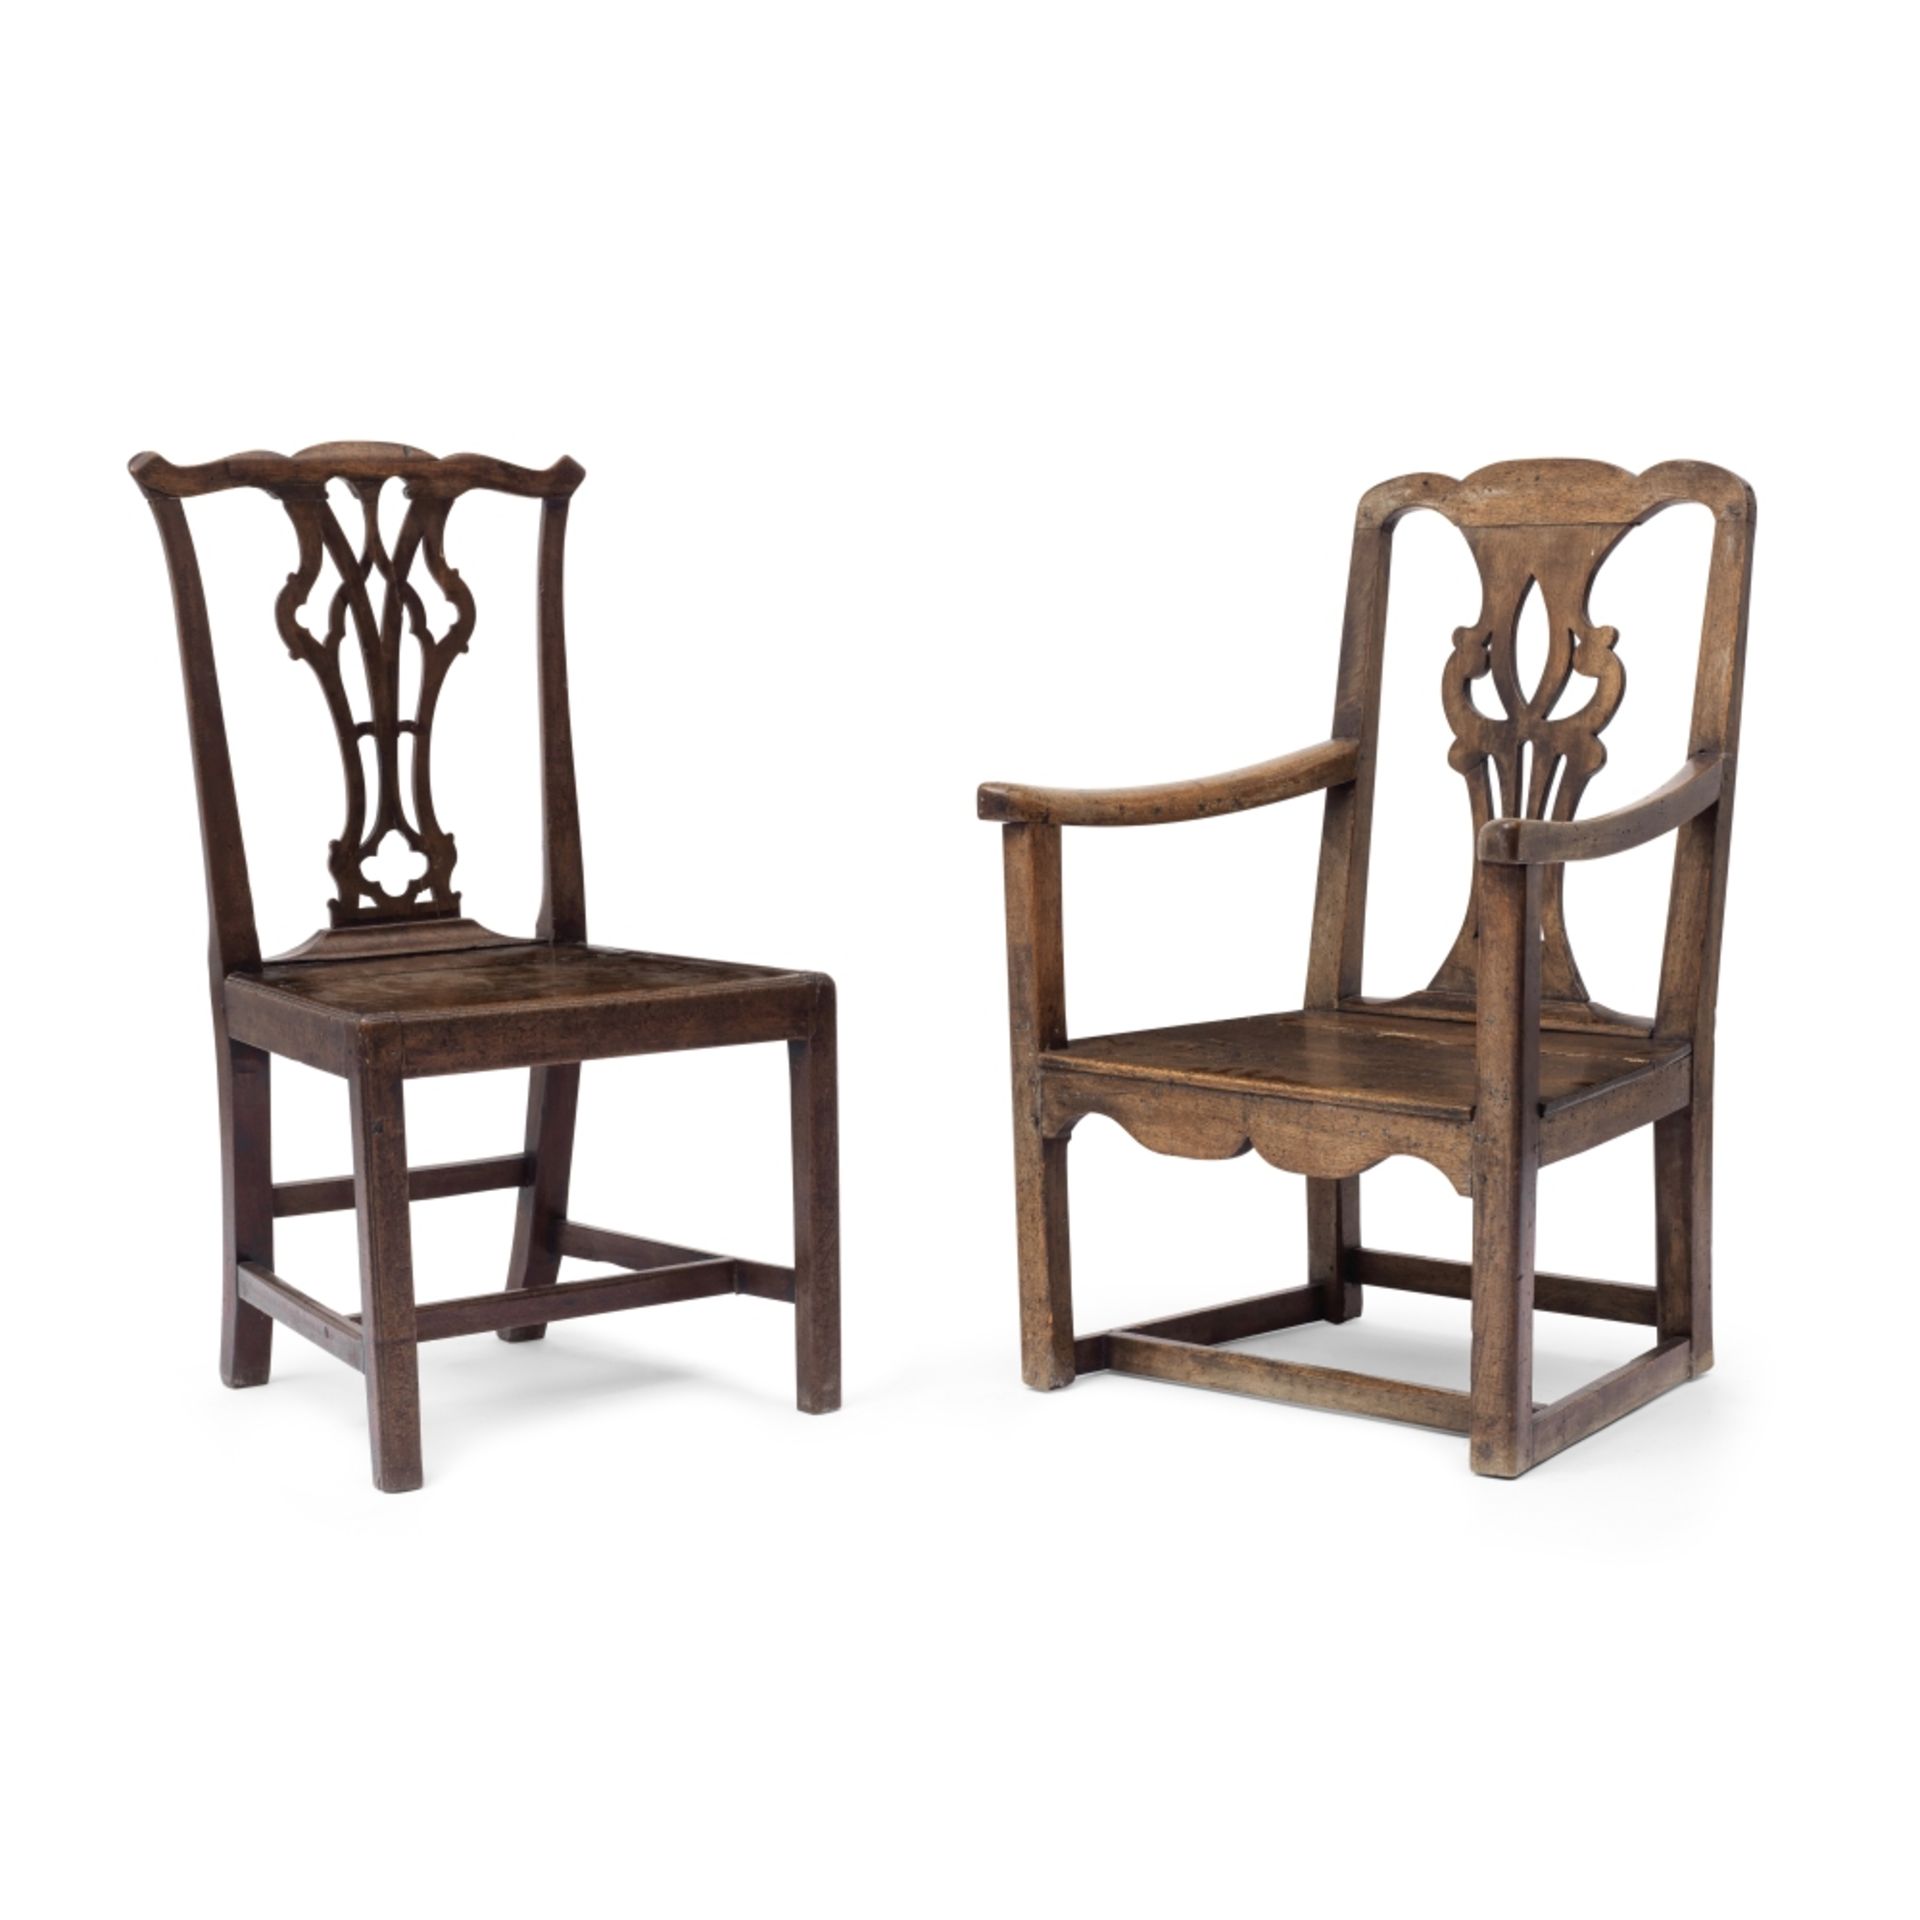 A George II mahogany dining chair, together with a George II armchair (2)